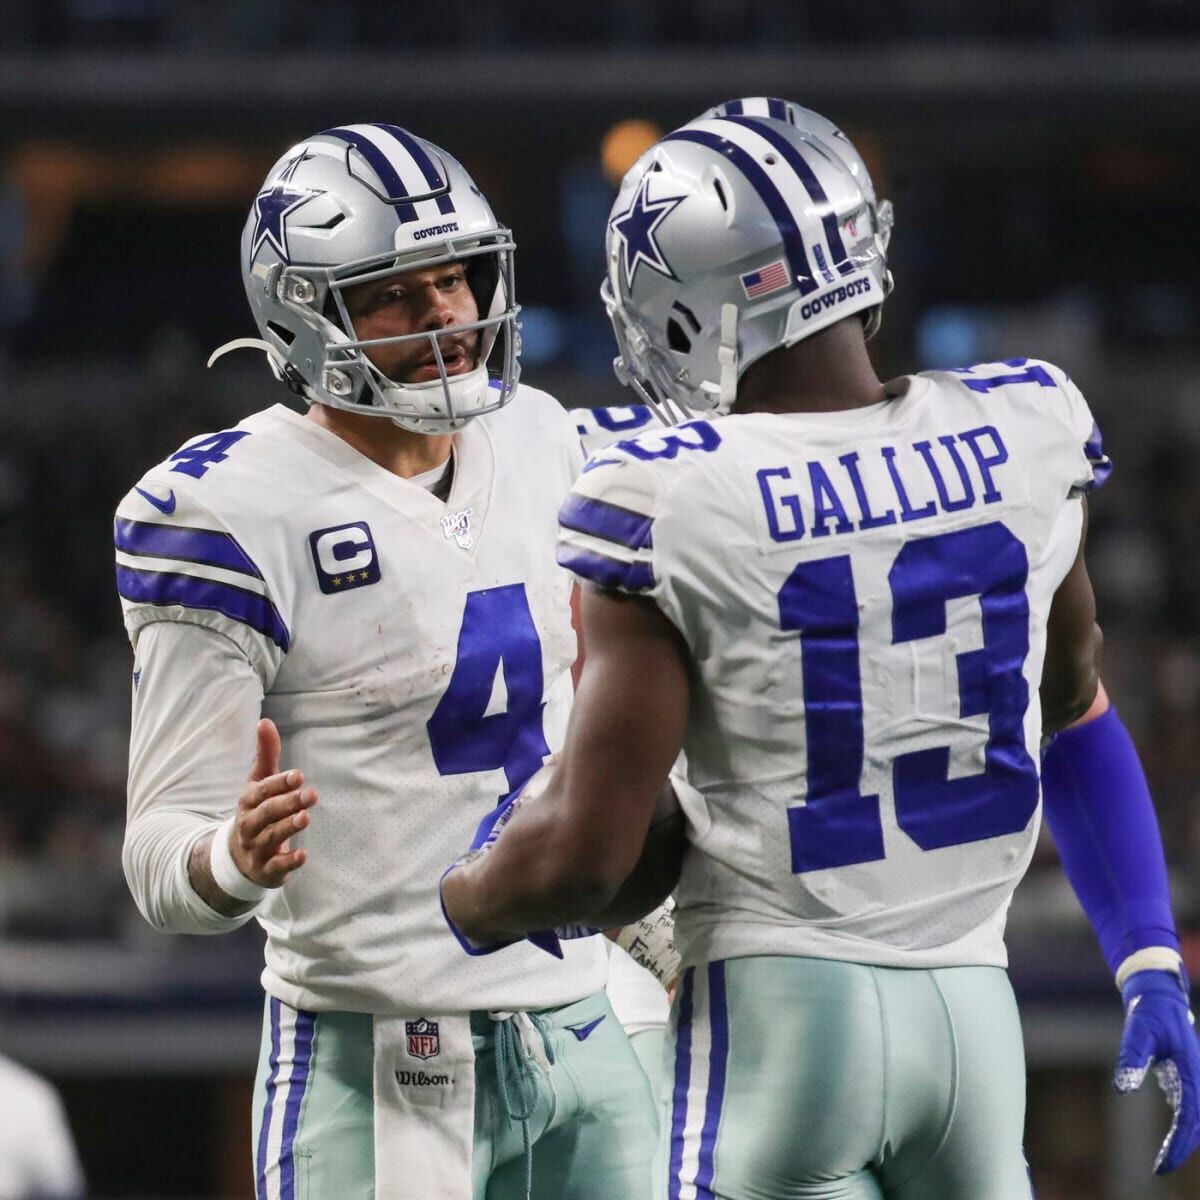 HOLD ON! Get up plays the BLAME GAME with the Cowboys 